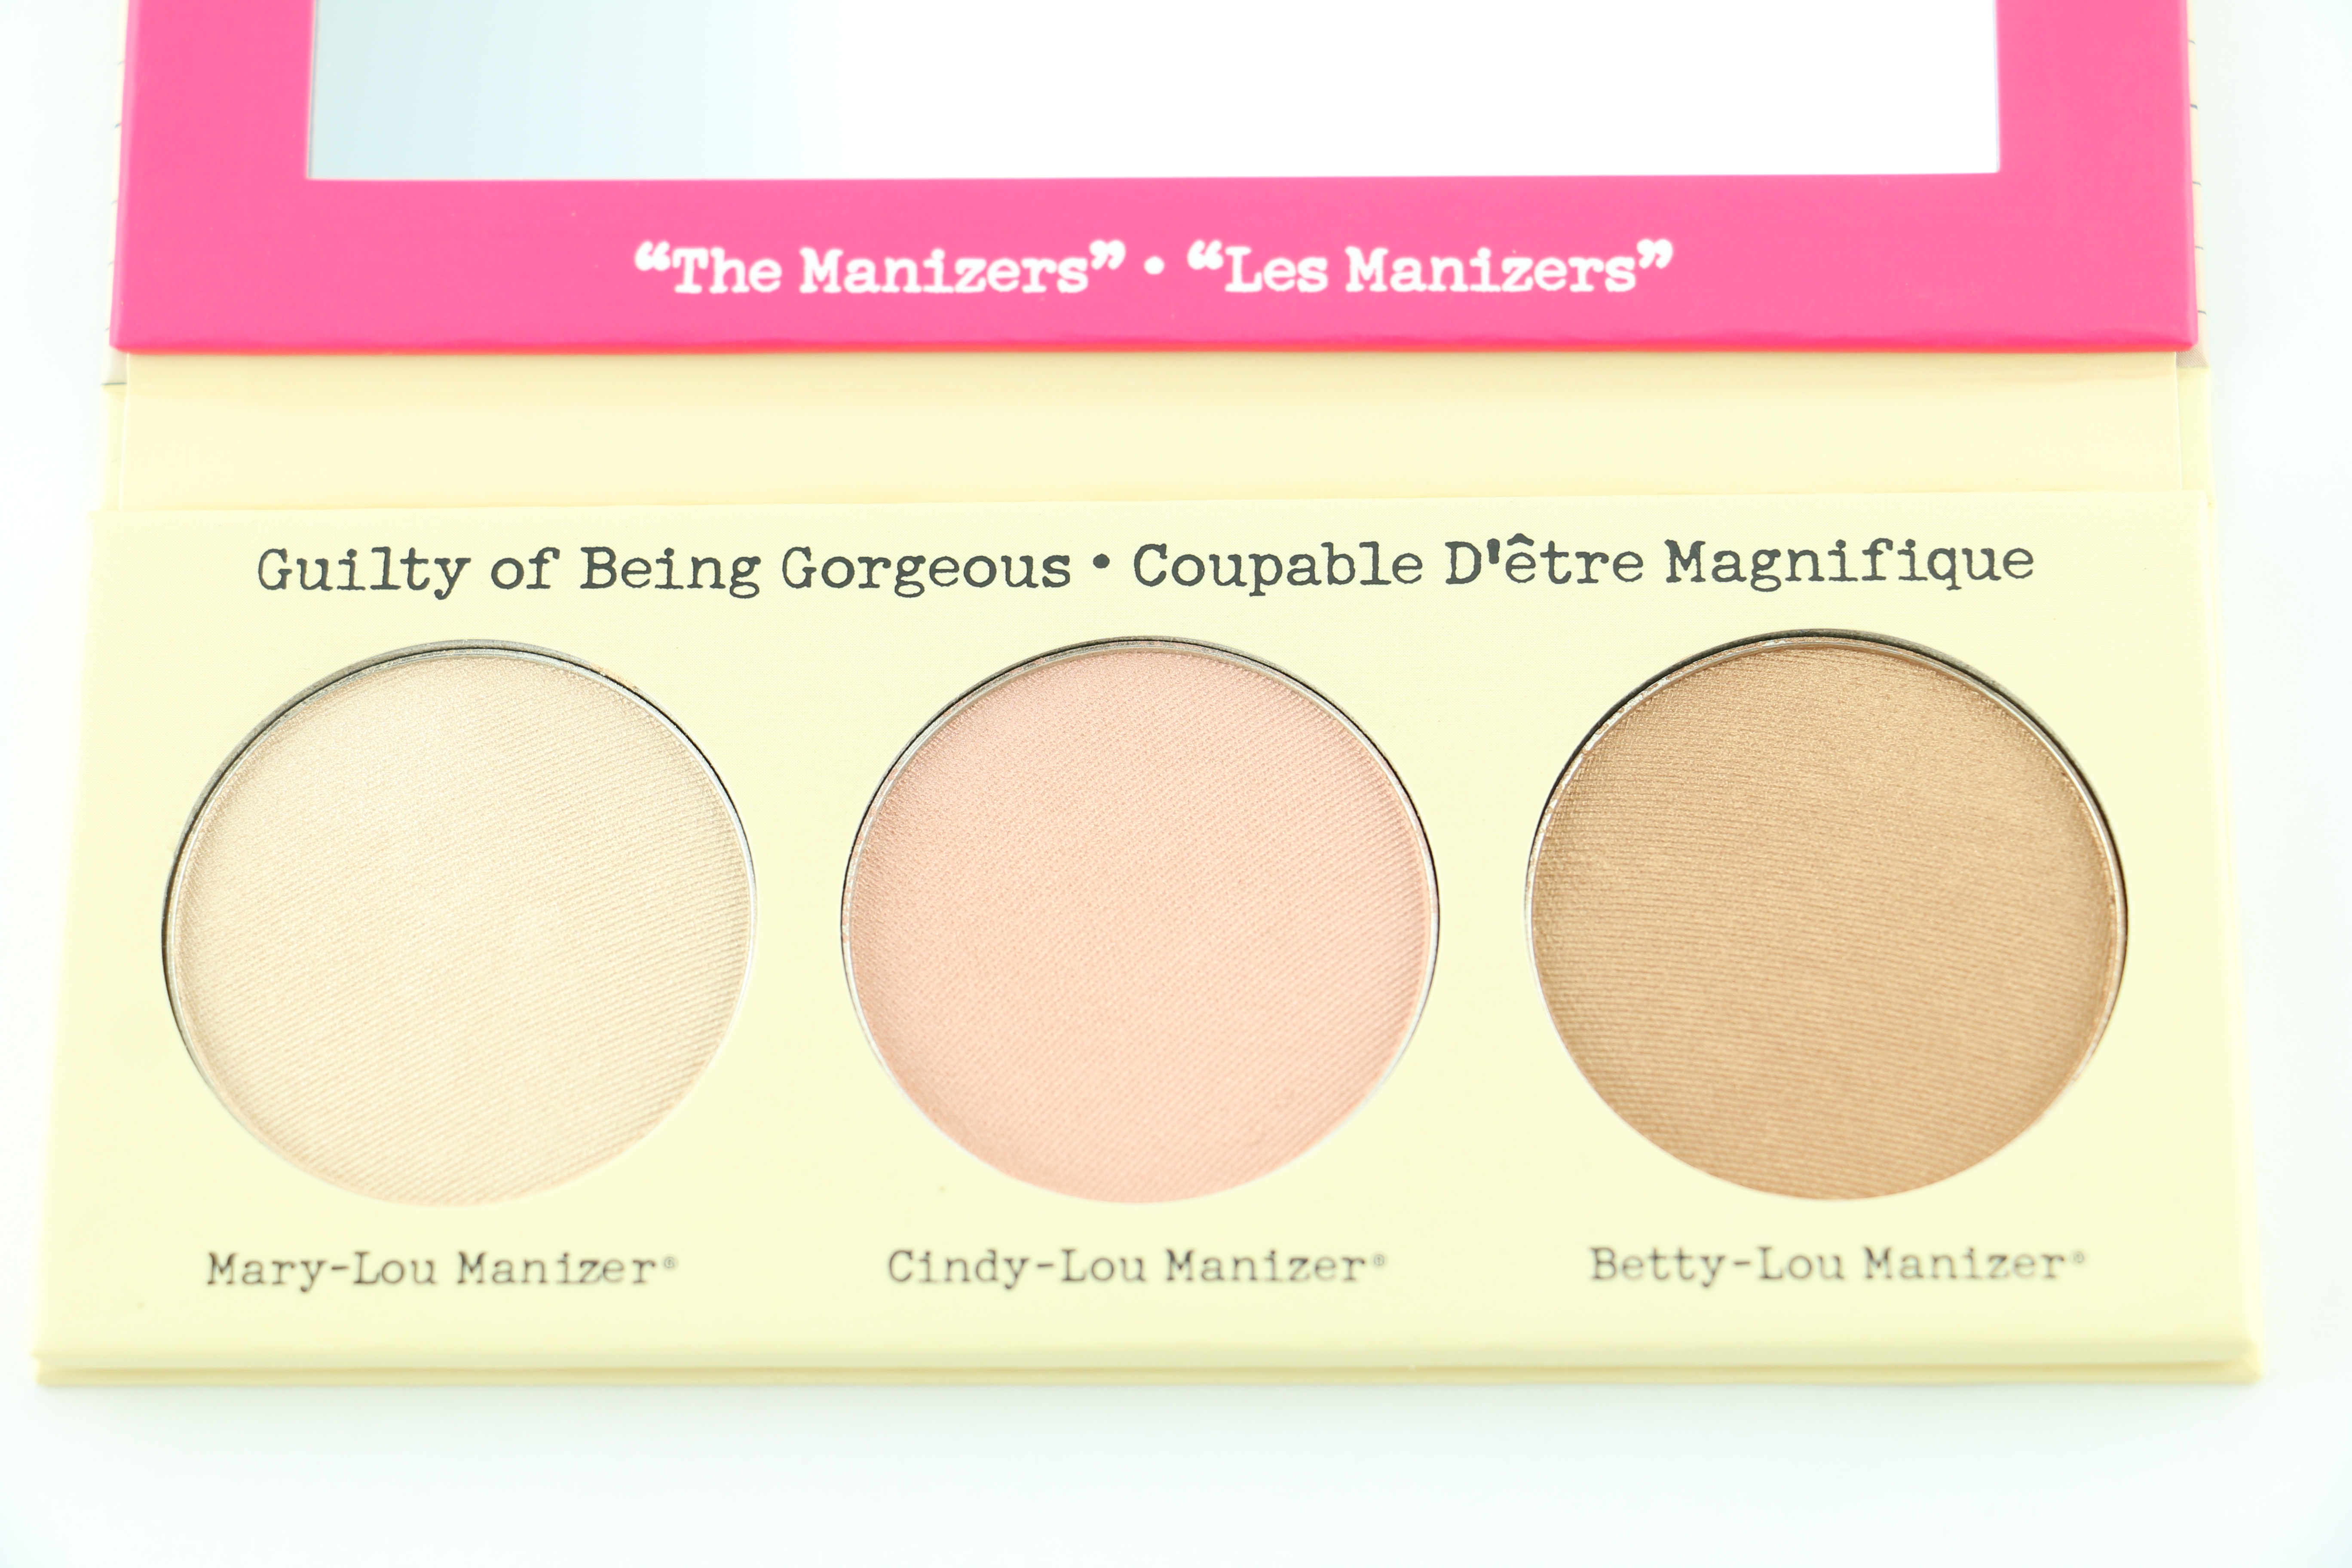 theBalm theManizer Sisters "the luminizers" palette